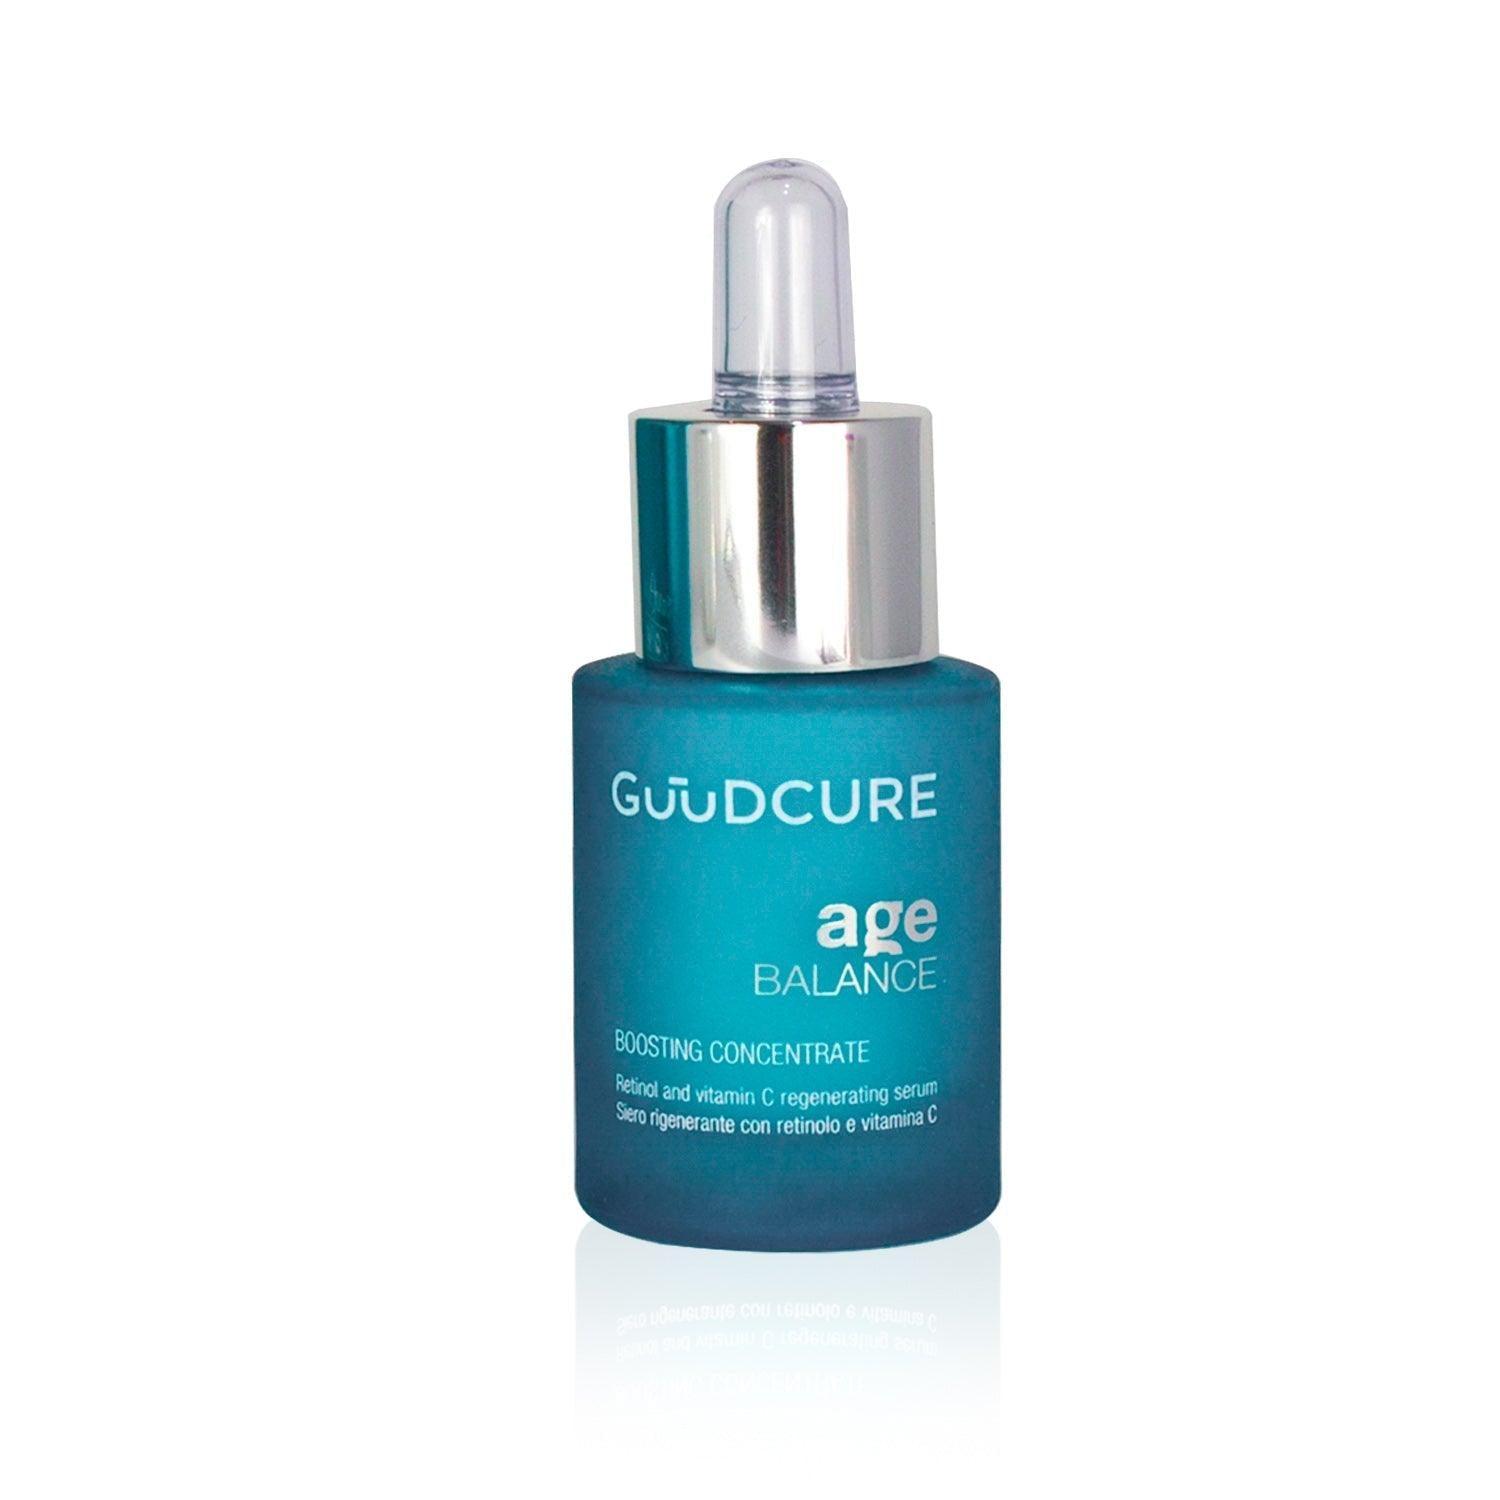 Guudcure Age Balance Boosting Concentrate 15 ml | Mrayti Store